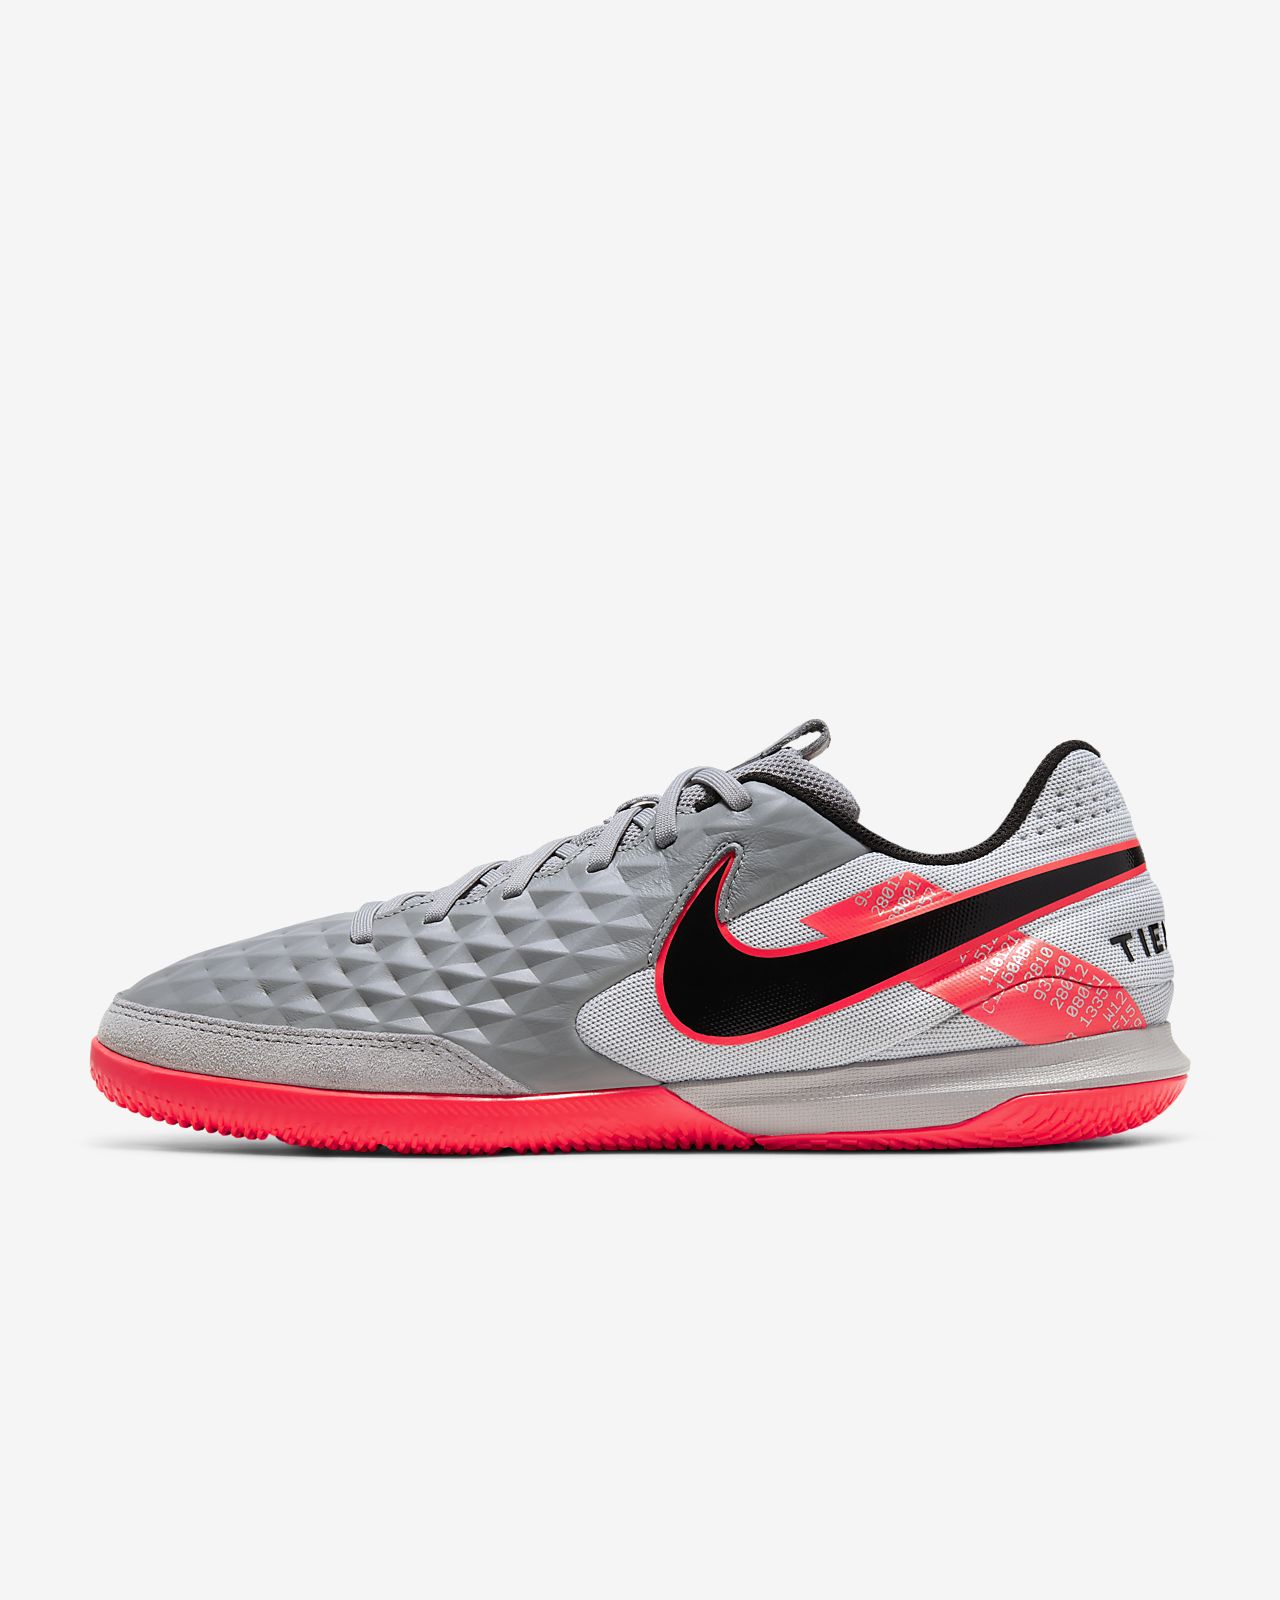 NIKE TIME LEGEND 8 ACADEMY IC AT6099 061 r.44.